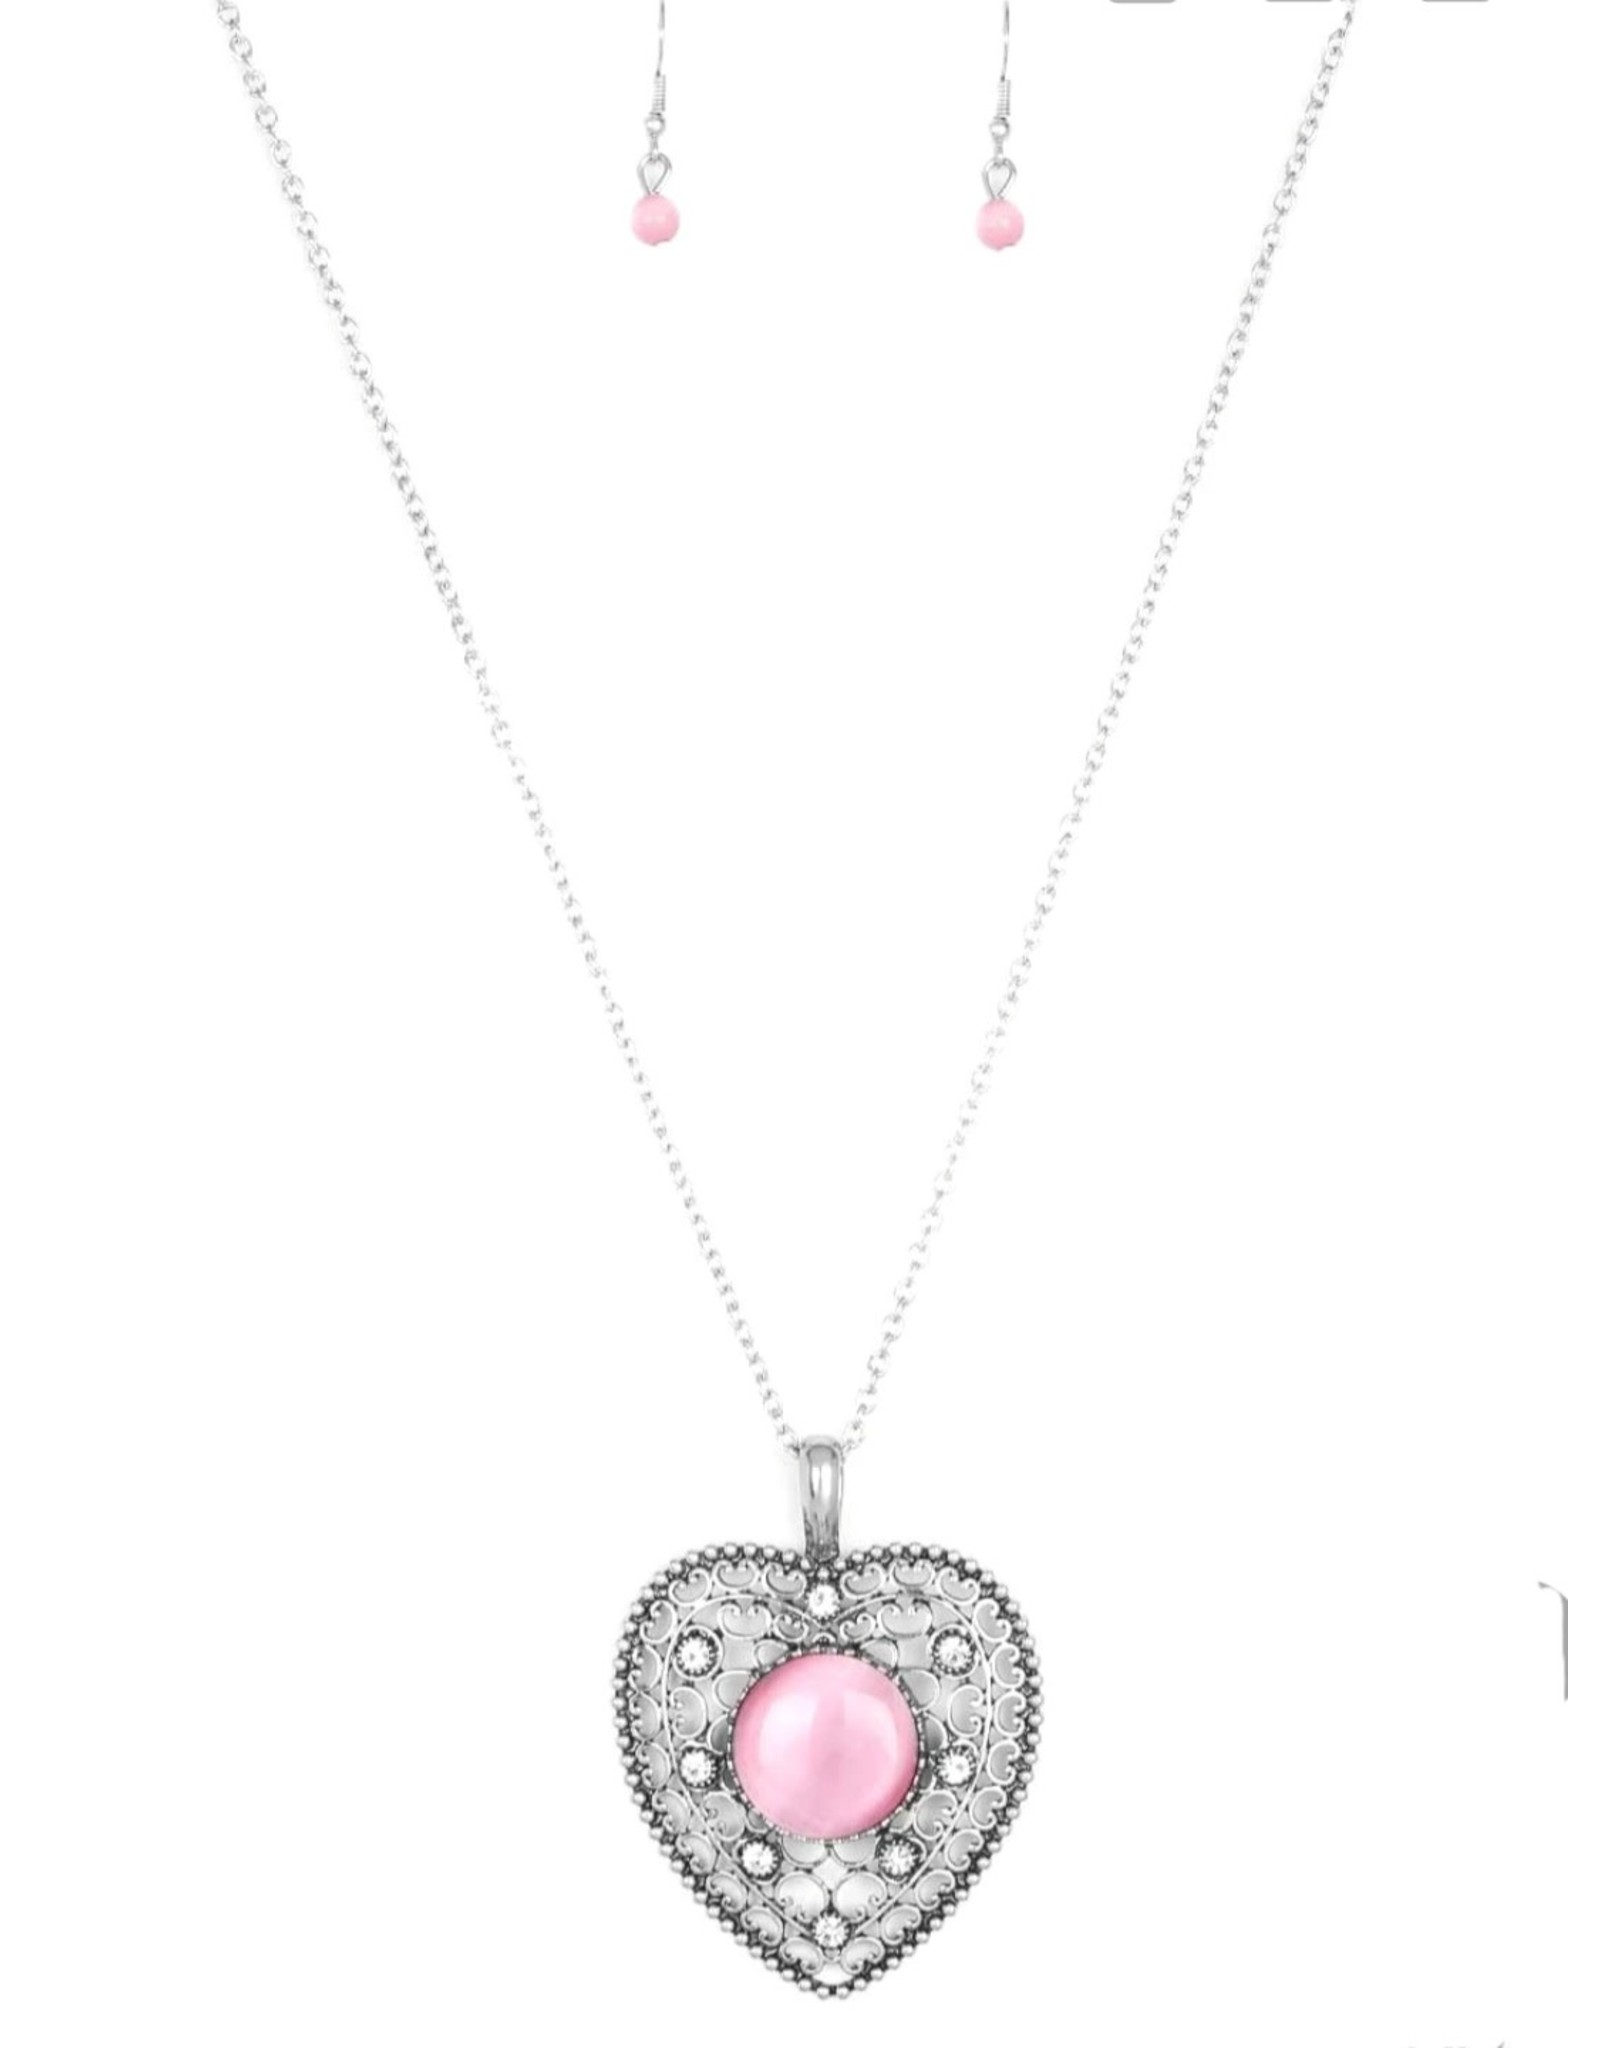 BELL'S BOUTIQUE One Heart Pink